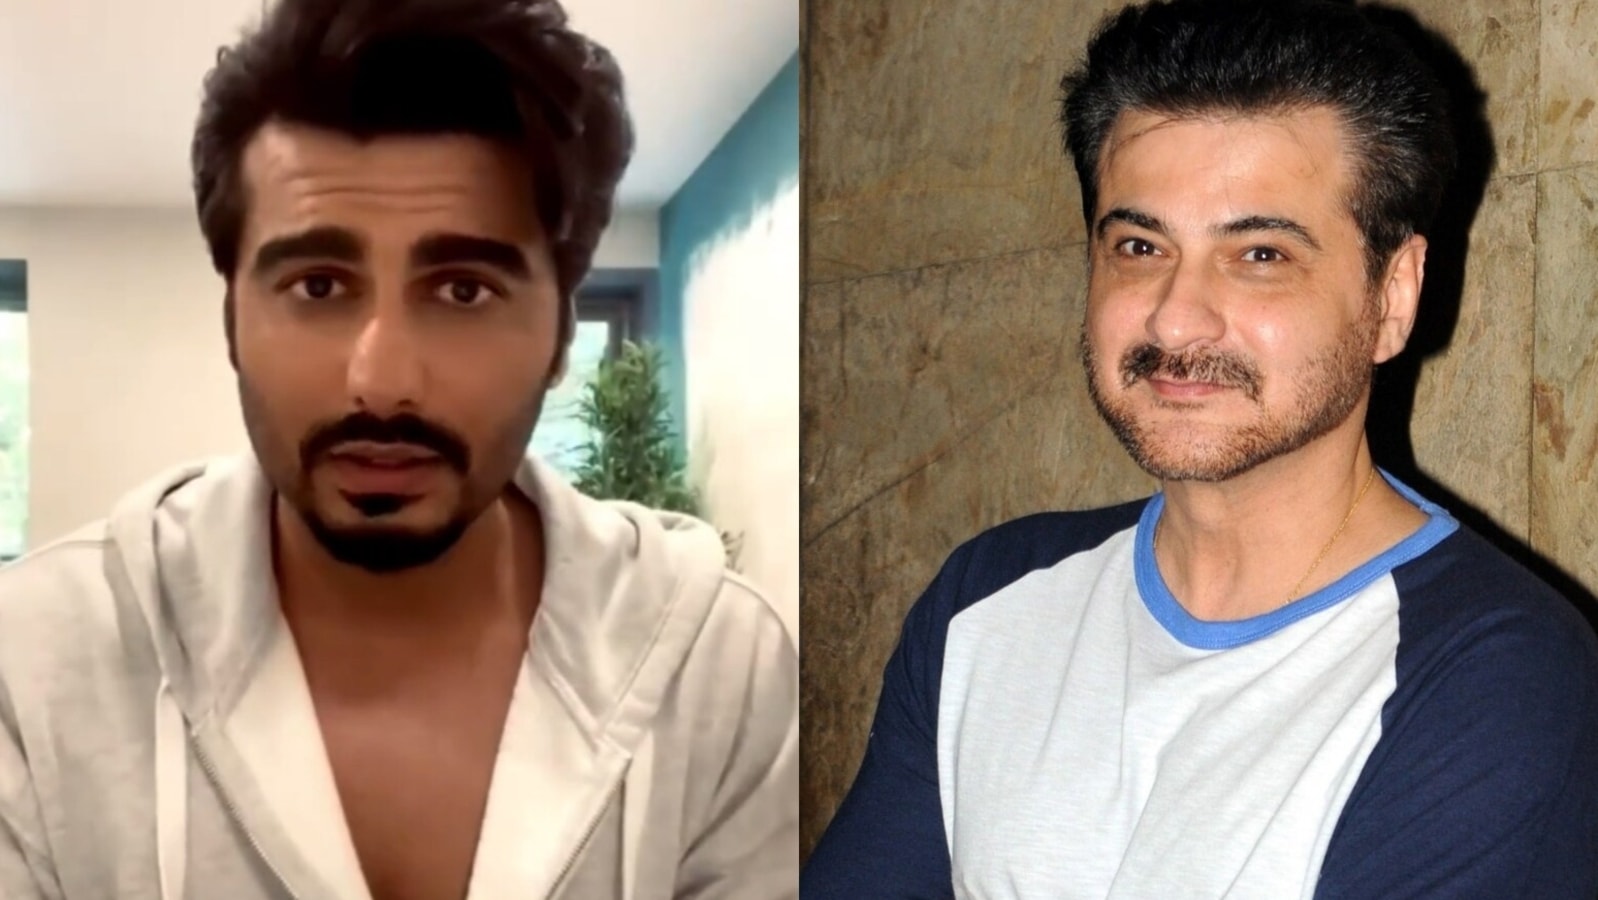 arjun-kapoor-thanks-uncle-sanjay-kapoor-for-being-with-him-i-faced-a-tough-time-as-a-child-with-my-personal-life